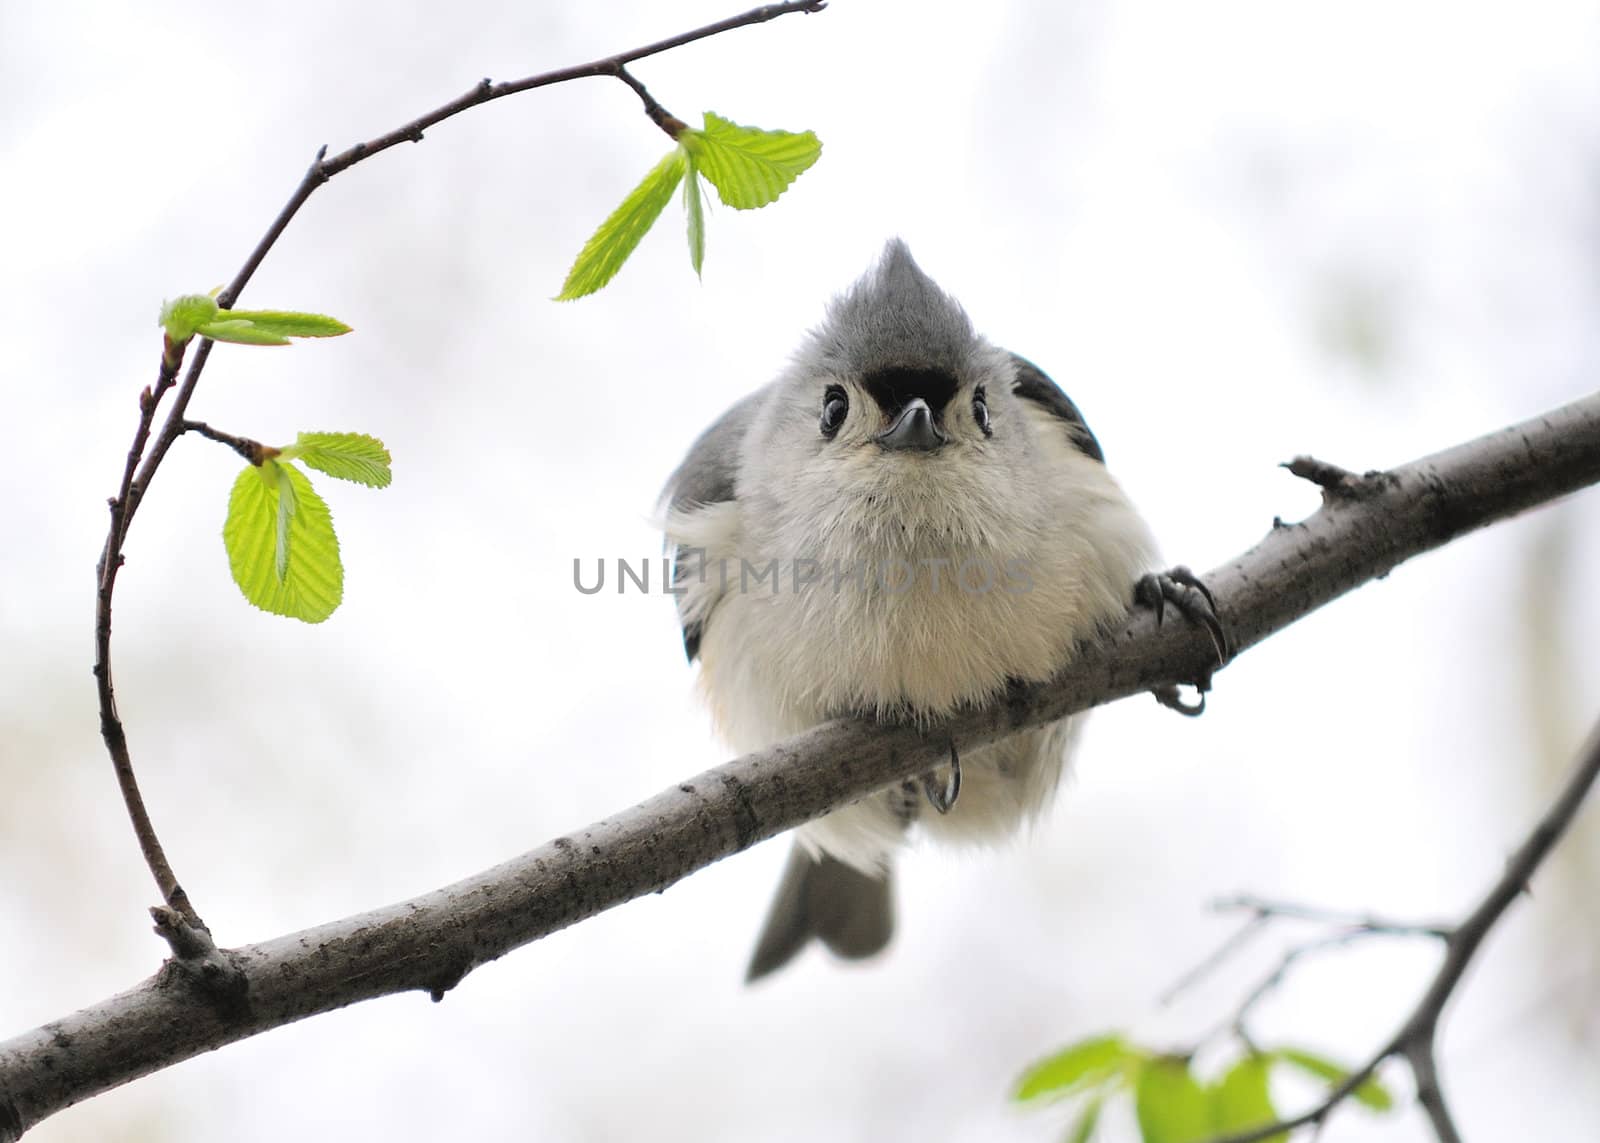 A tufted titmouse perched on a tree branch.